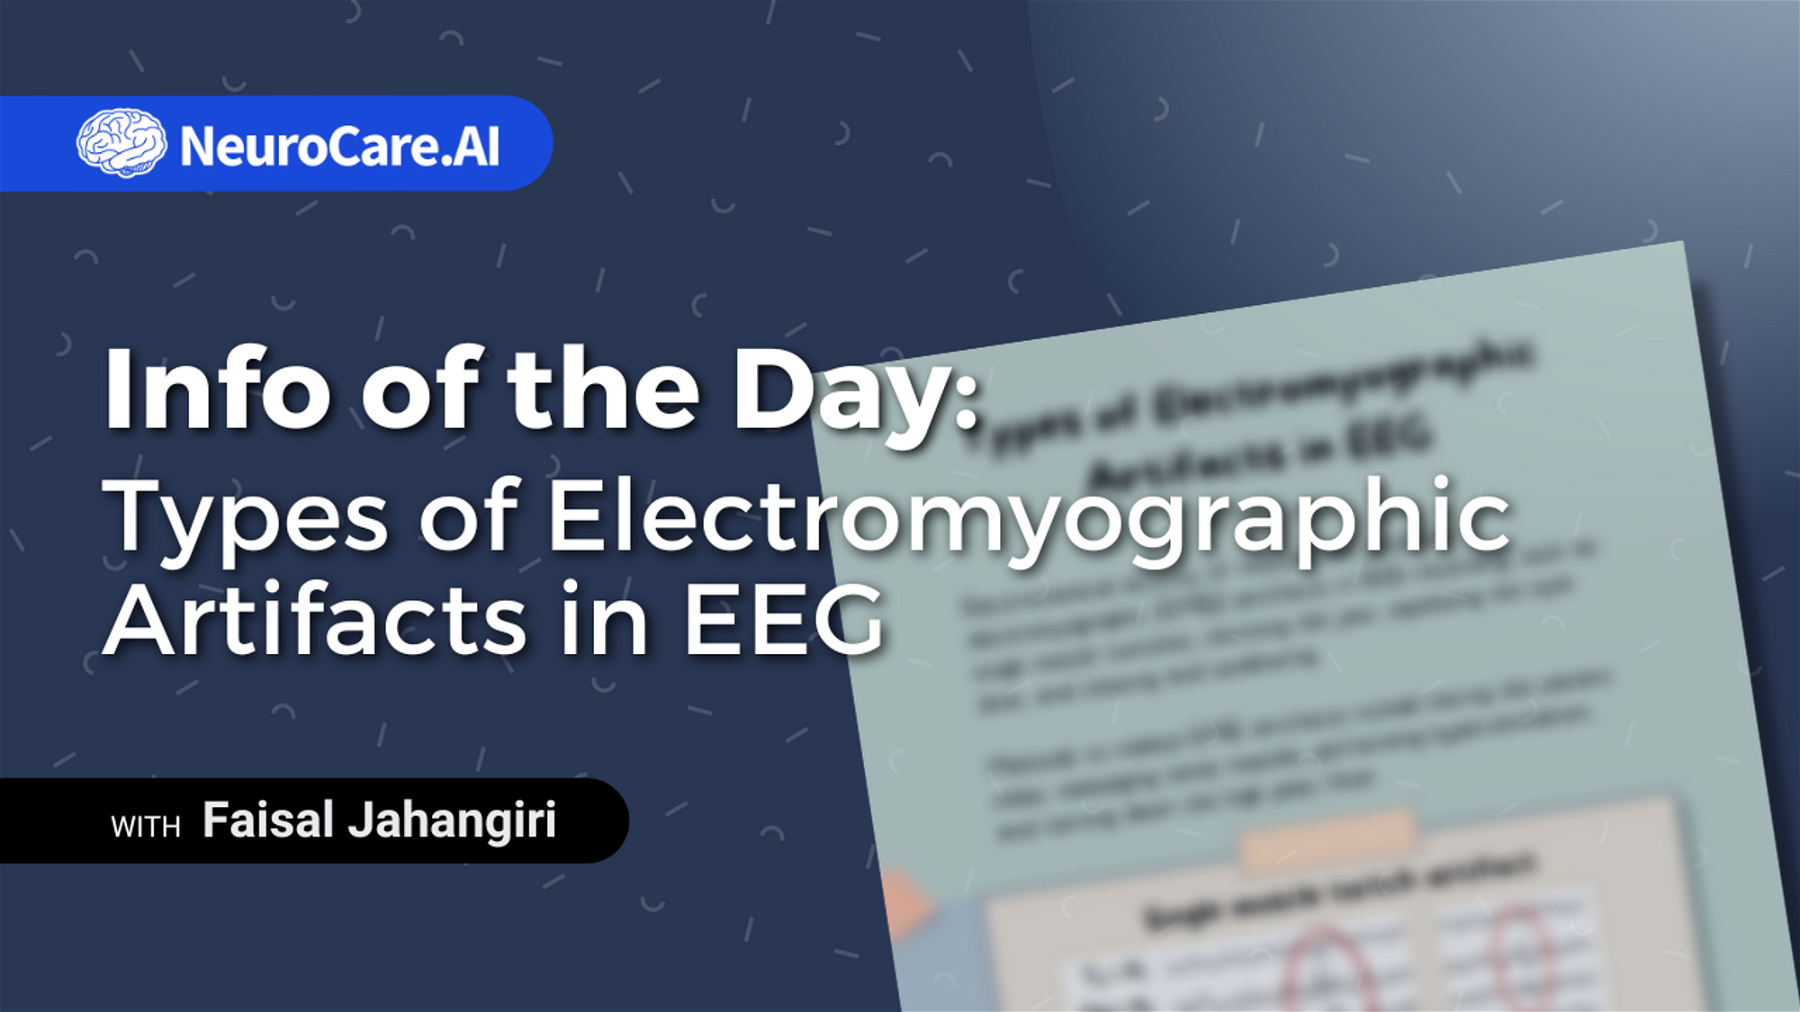 Info of the Day: "Types of Electromyographic Artifacts in EEG"